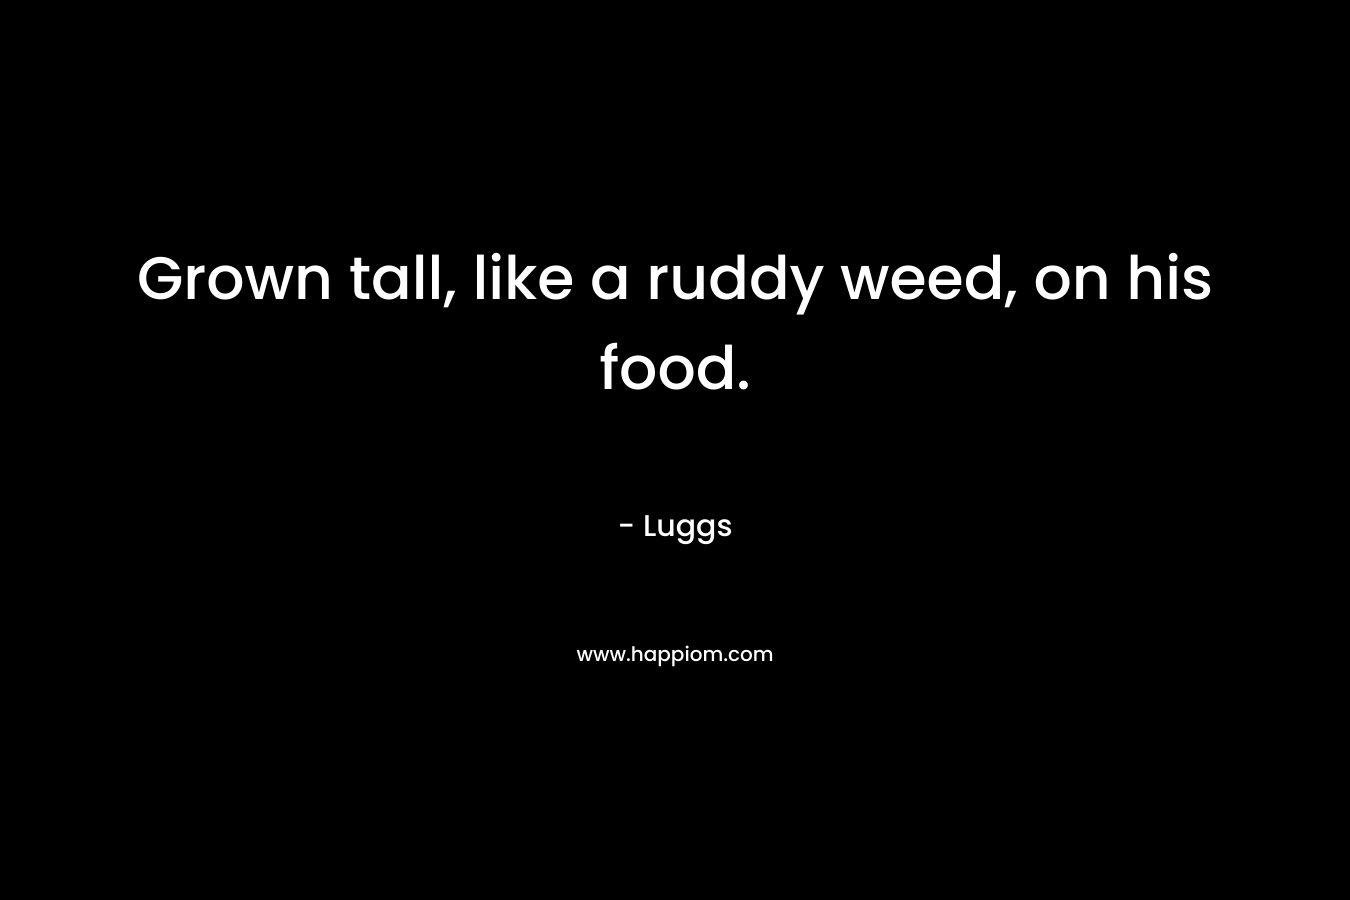 Grown tall, like a ruddy weed, on his food. – Luggs